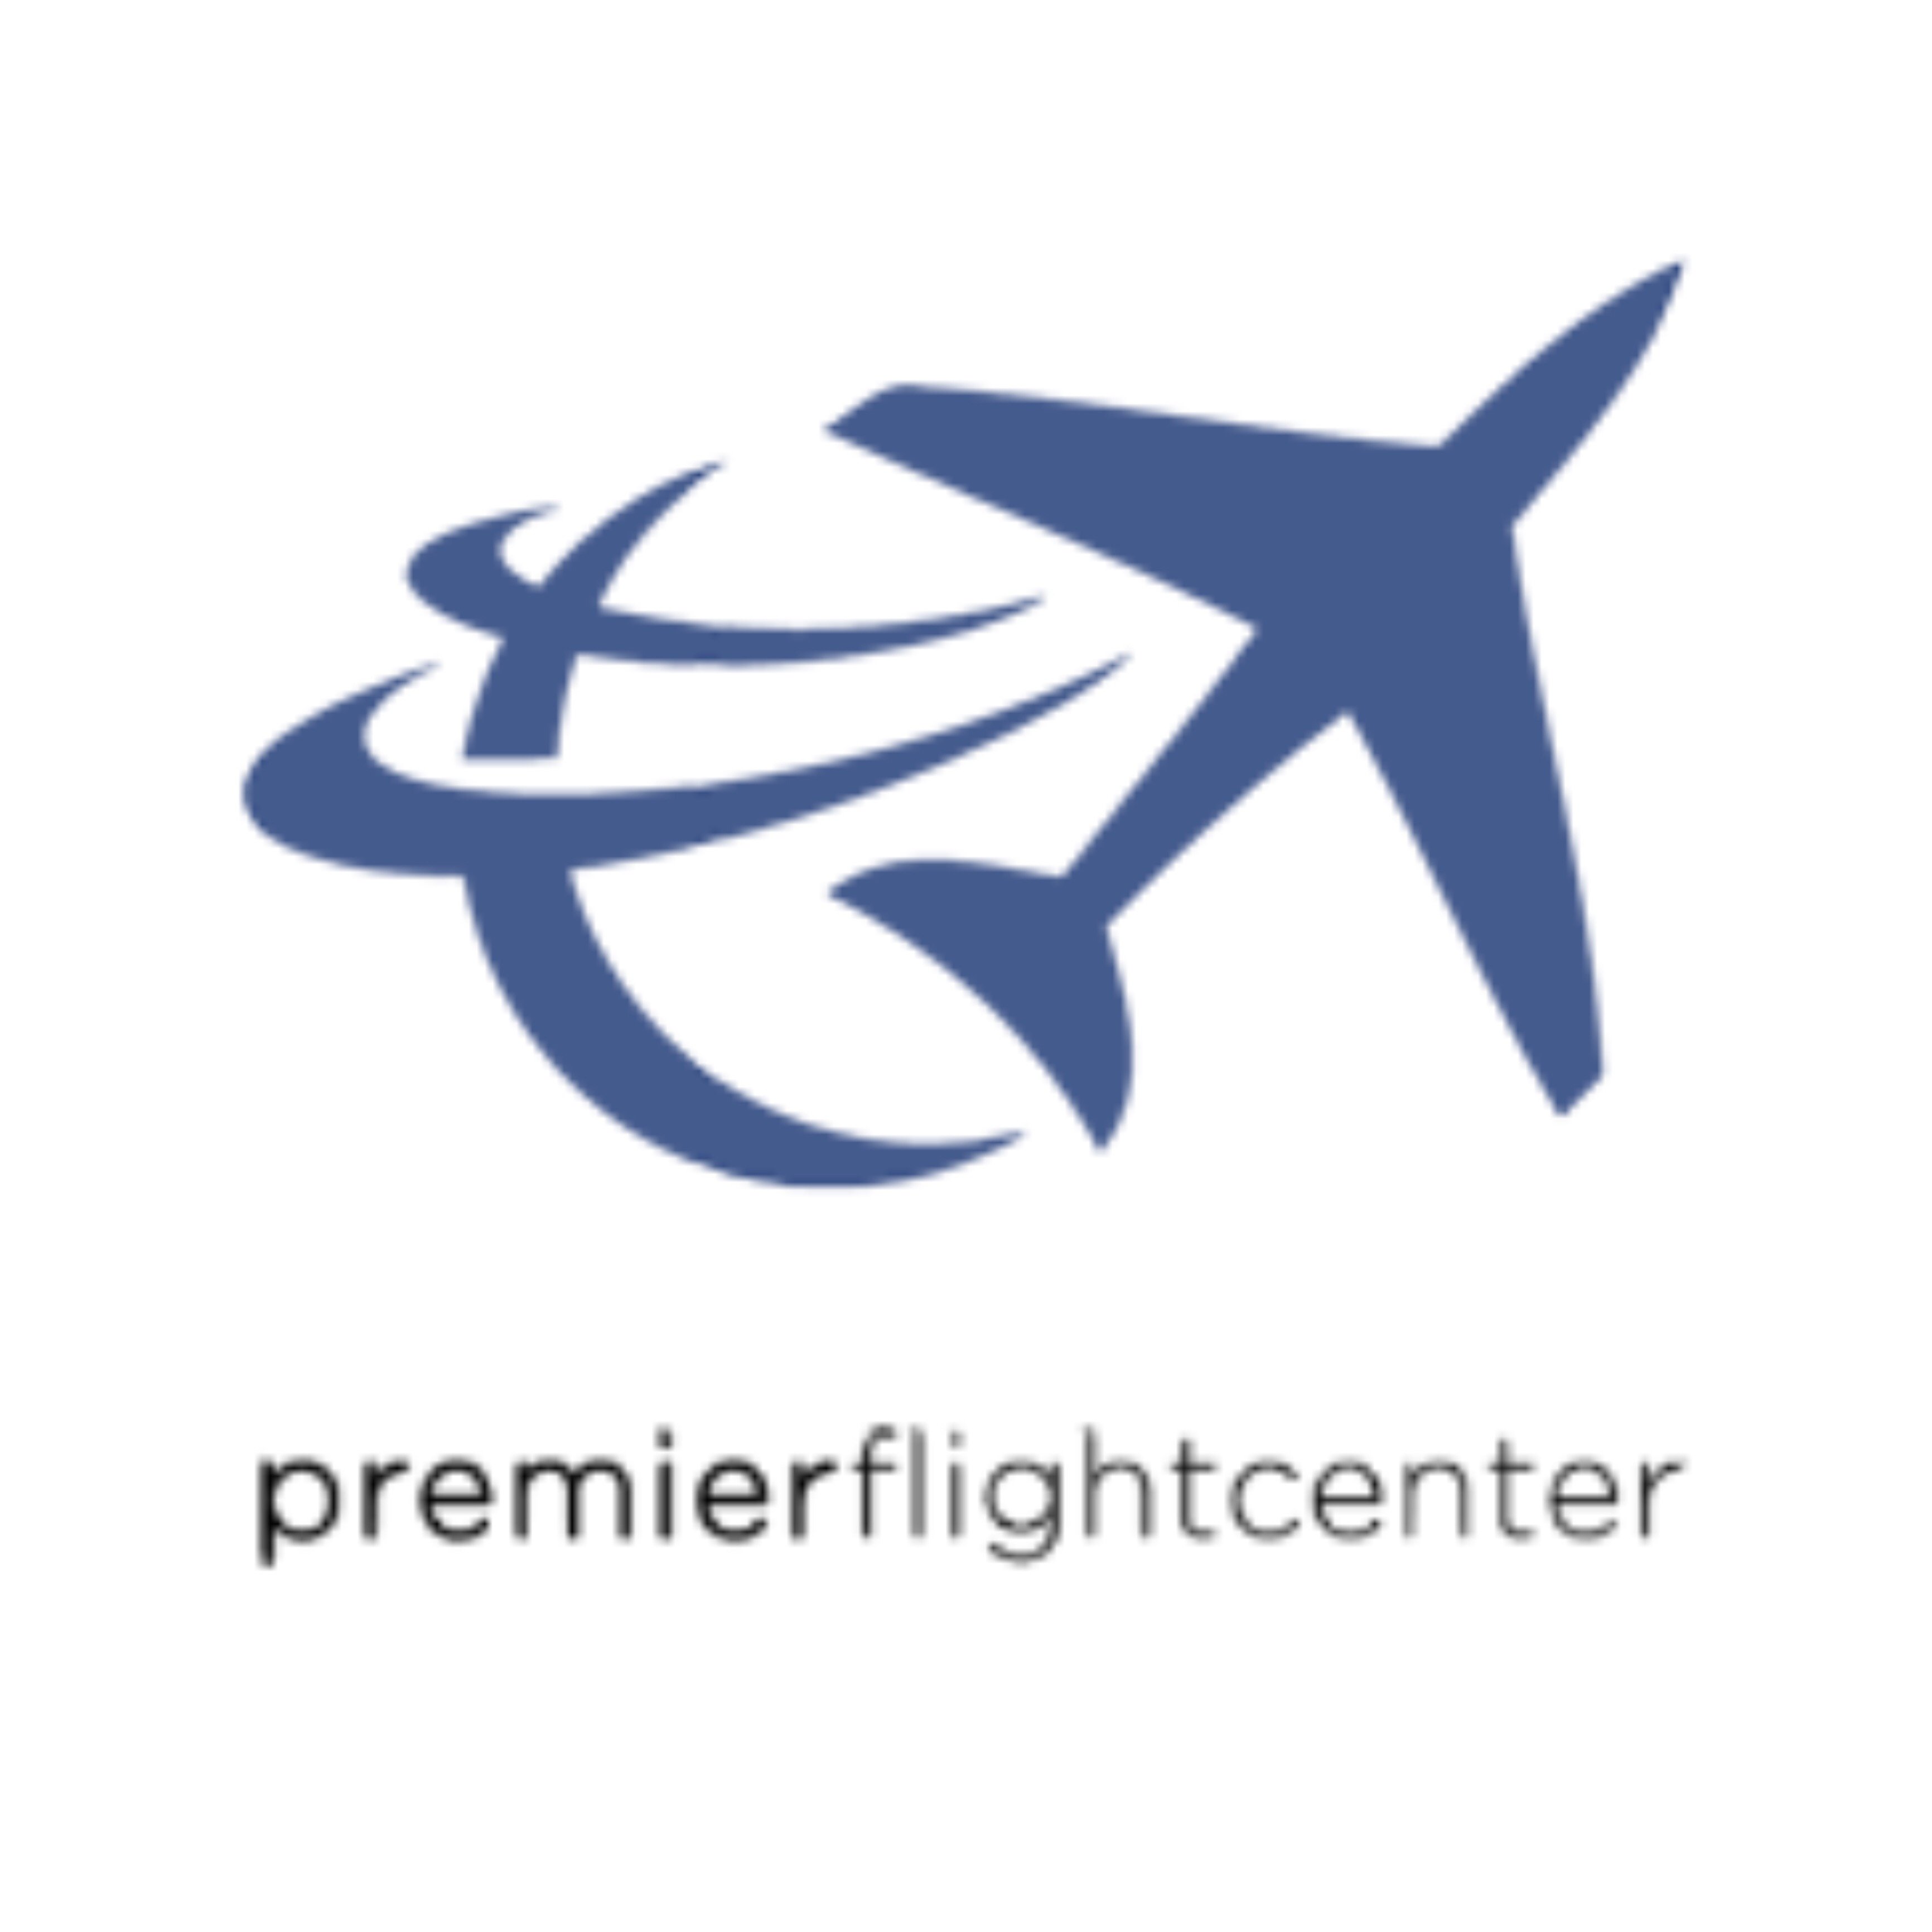 Premier Flight Center is a Part 141 certified flight school in Southwest MO & the exclusive flight training provider for Ozarks Technical Community College.